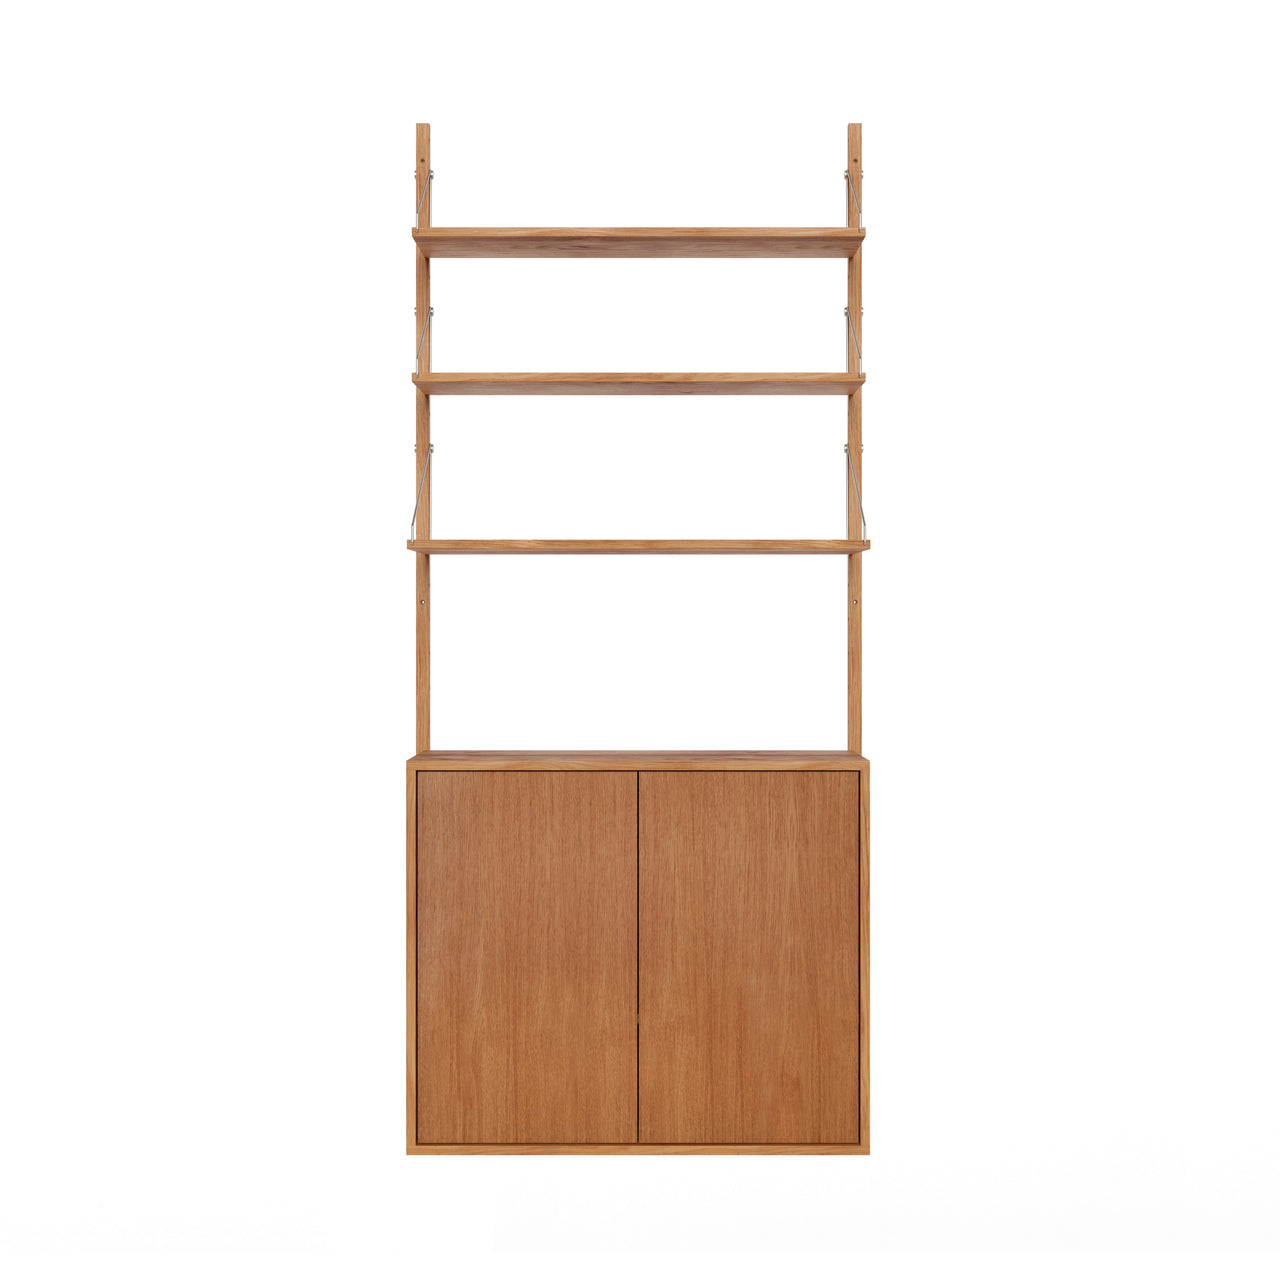 Shelf Library: High (W80) + Cabinet Section - Medium + Natural Oiled Oak